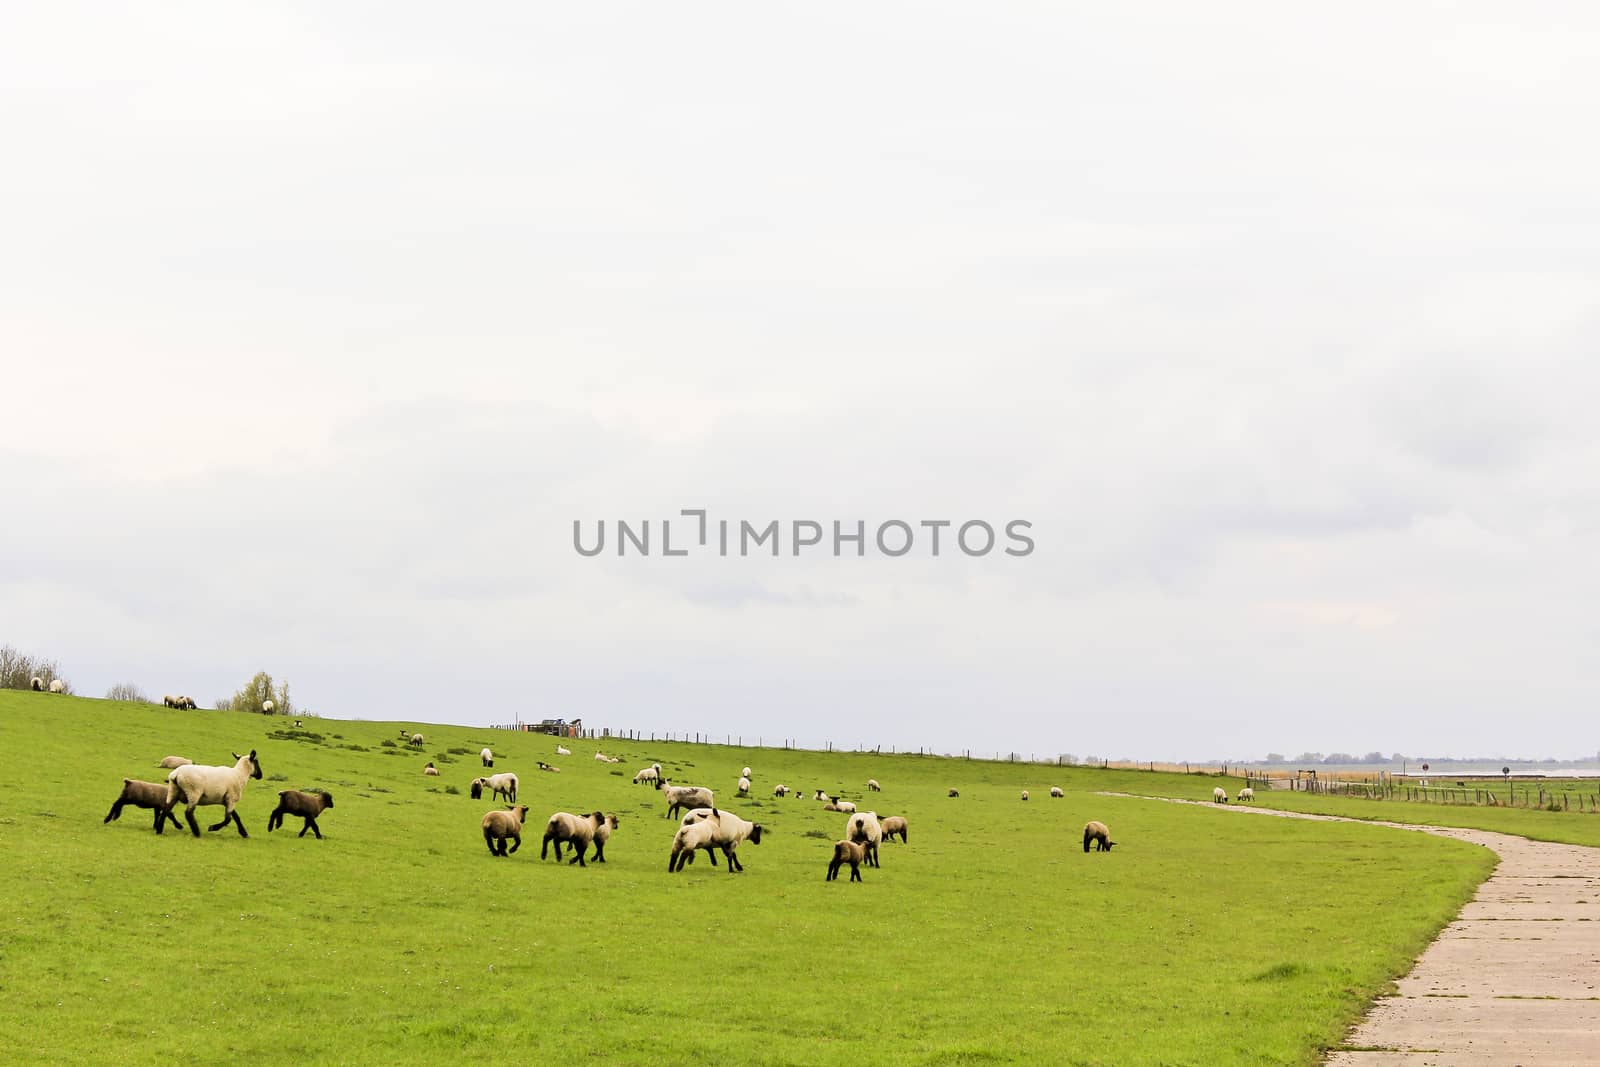 Landscape with running sheep and pasture in Sehestedt, Jade, Wasermarsch, Germany. Farm and sheep pasture.